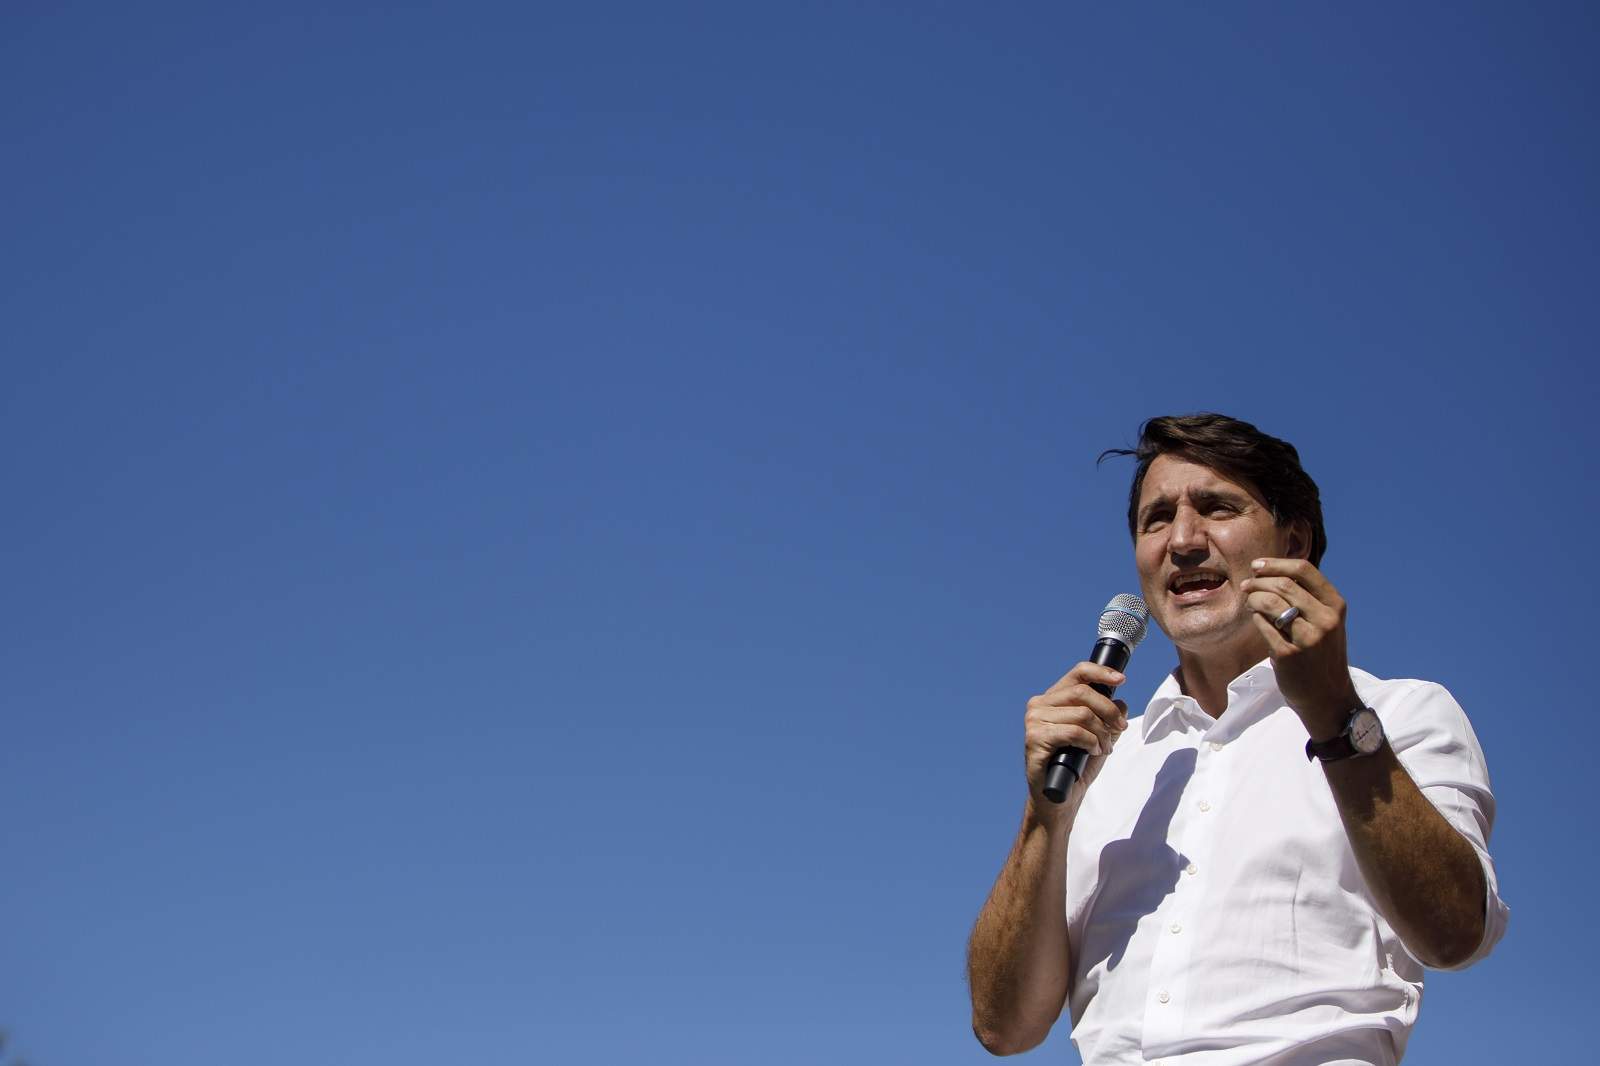 A day before the snap federal election, Canadian Prime Minister Justin Trudeau speaks to supporters in Niagara Falls, 19 September 2021 (Cole Burston/Getty Images)